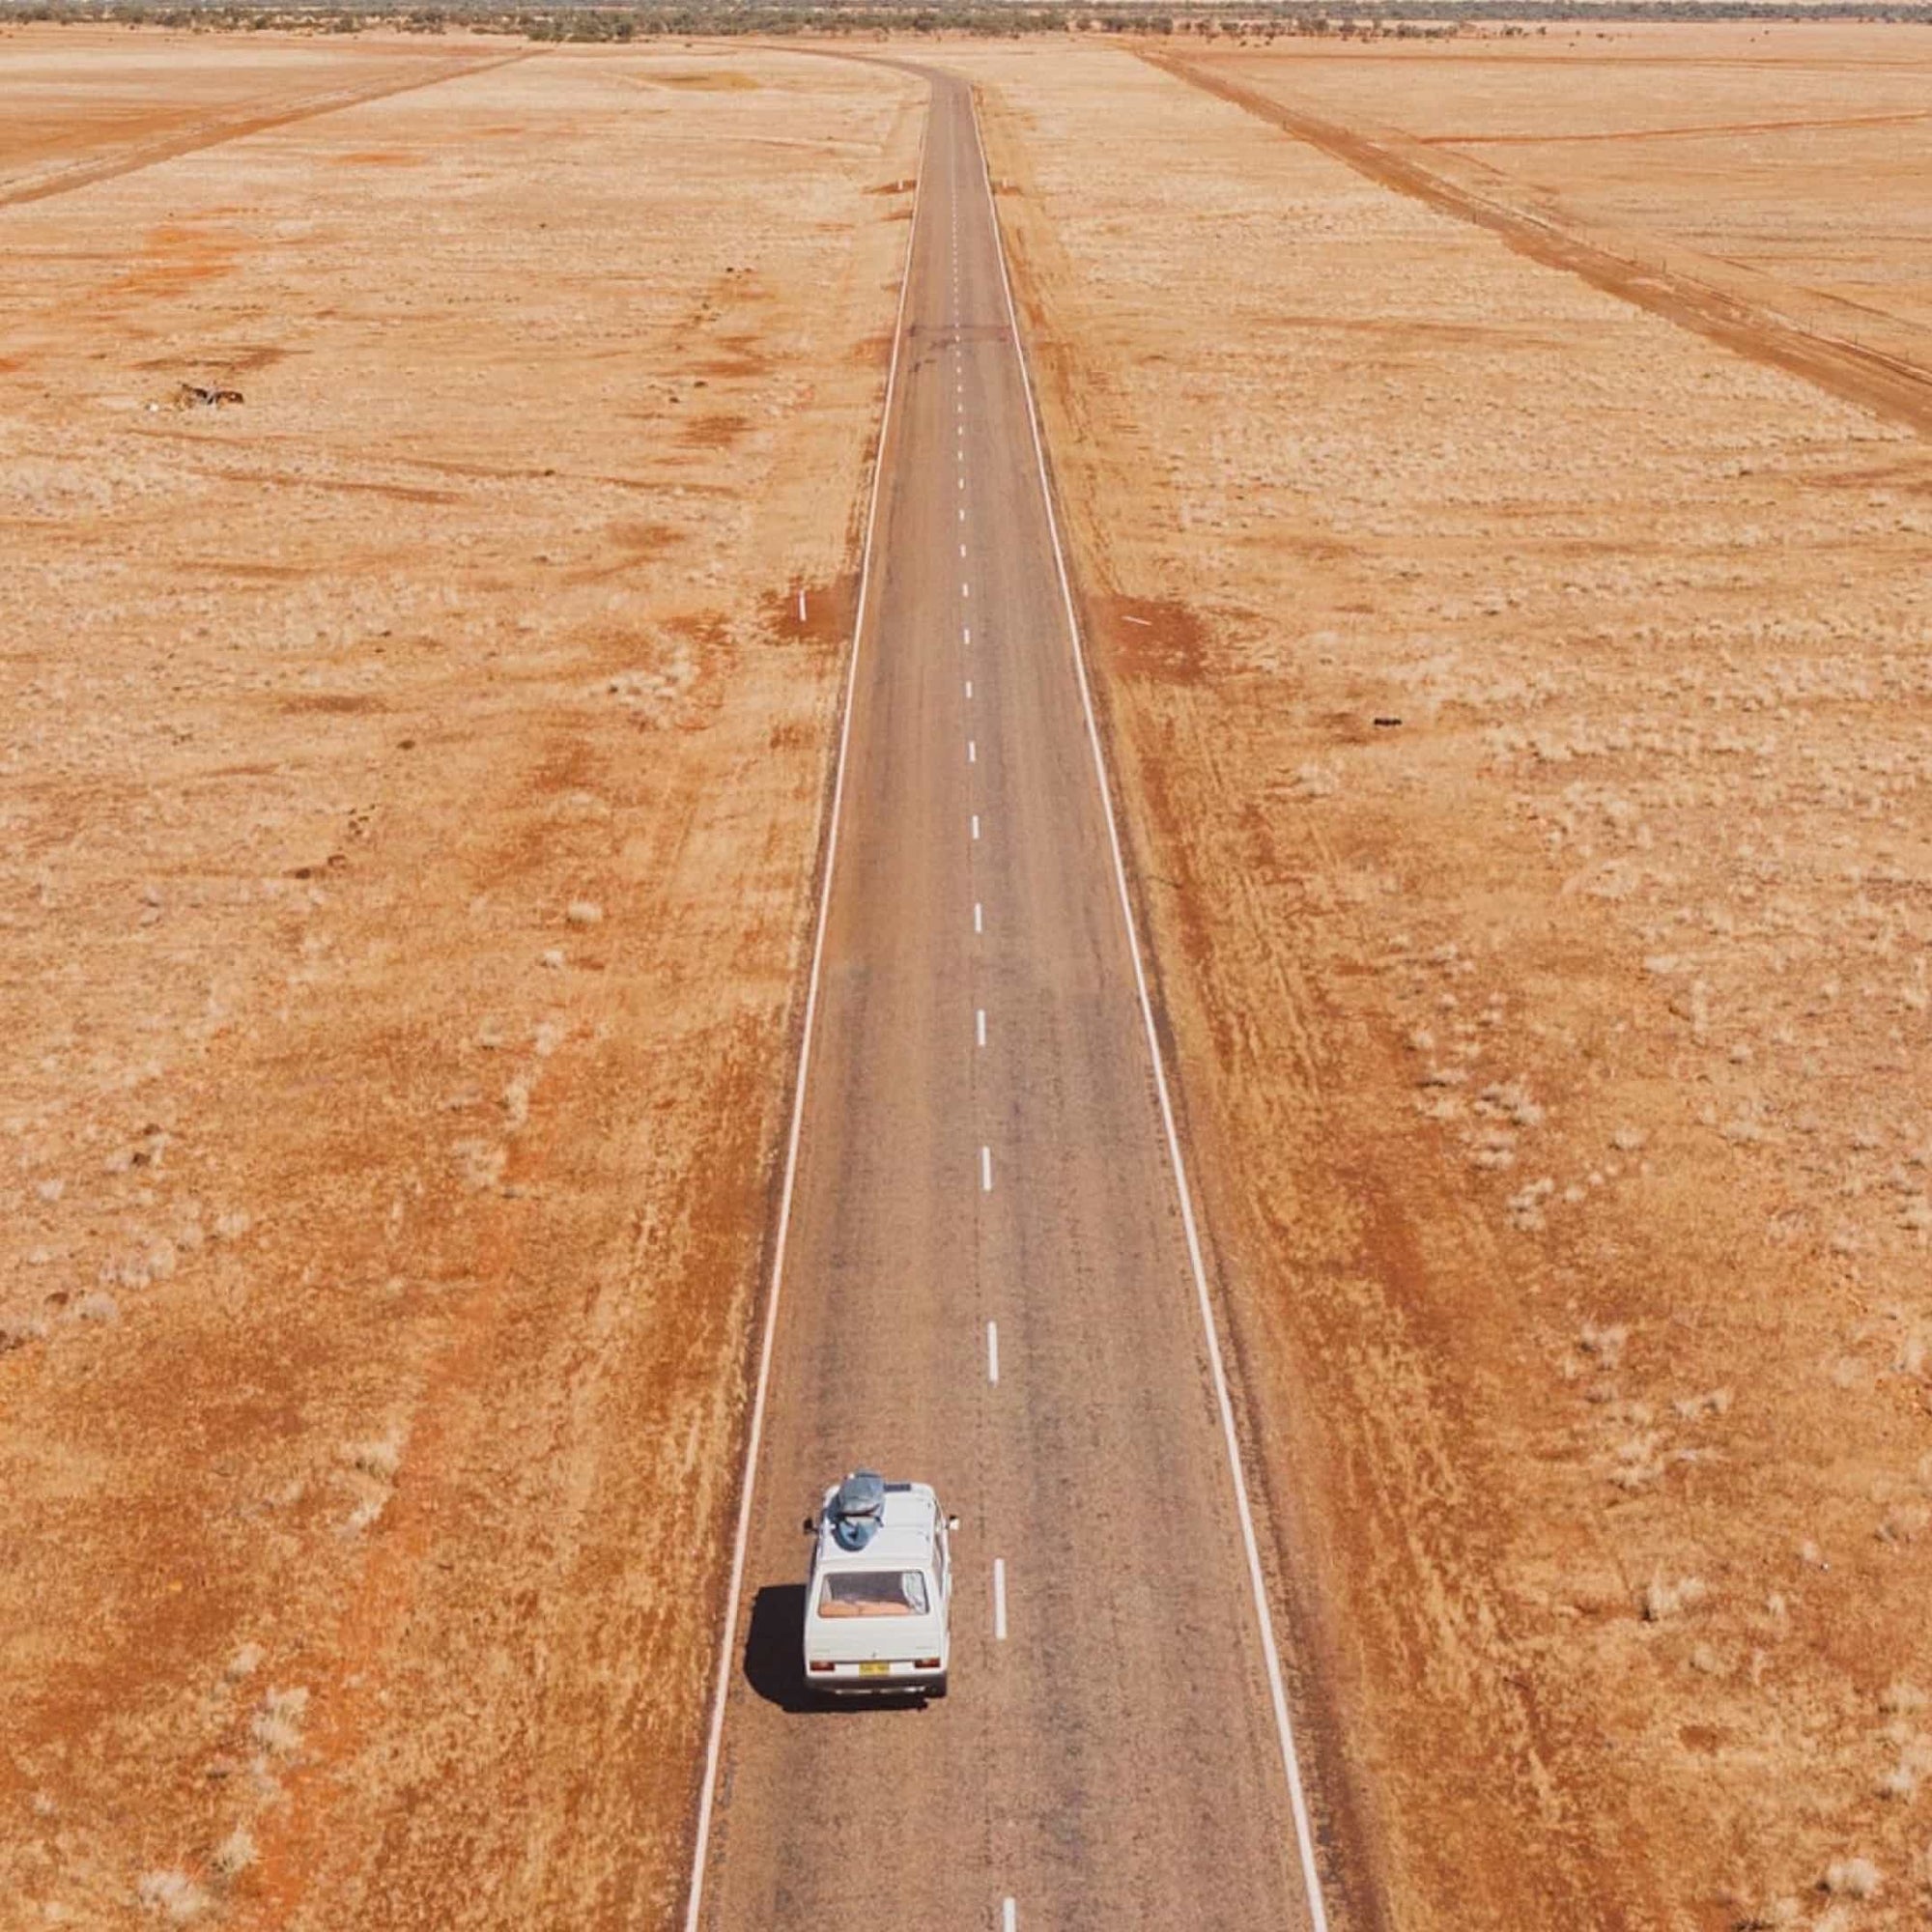 Aerial view of a van driving down a road in the middle of the Australian desert